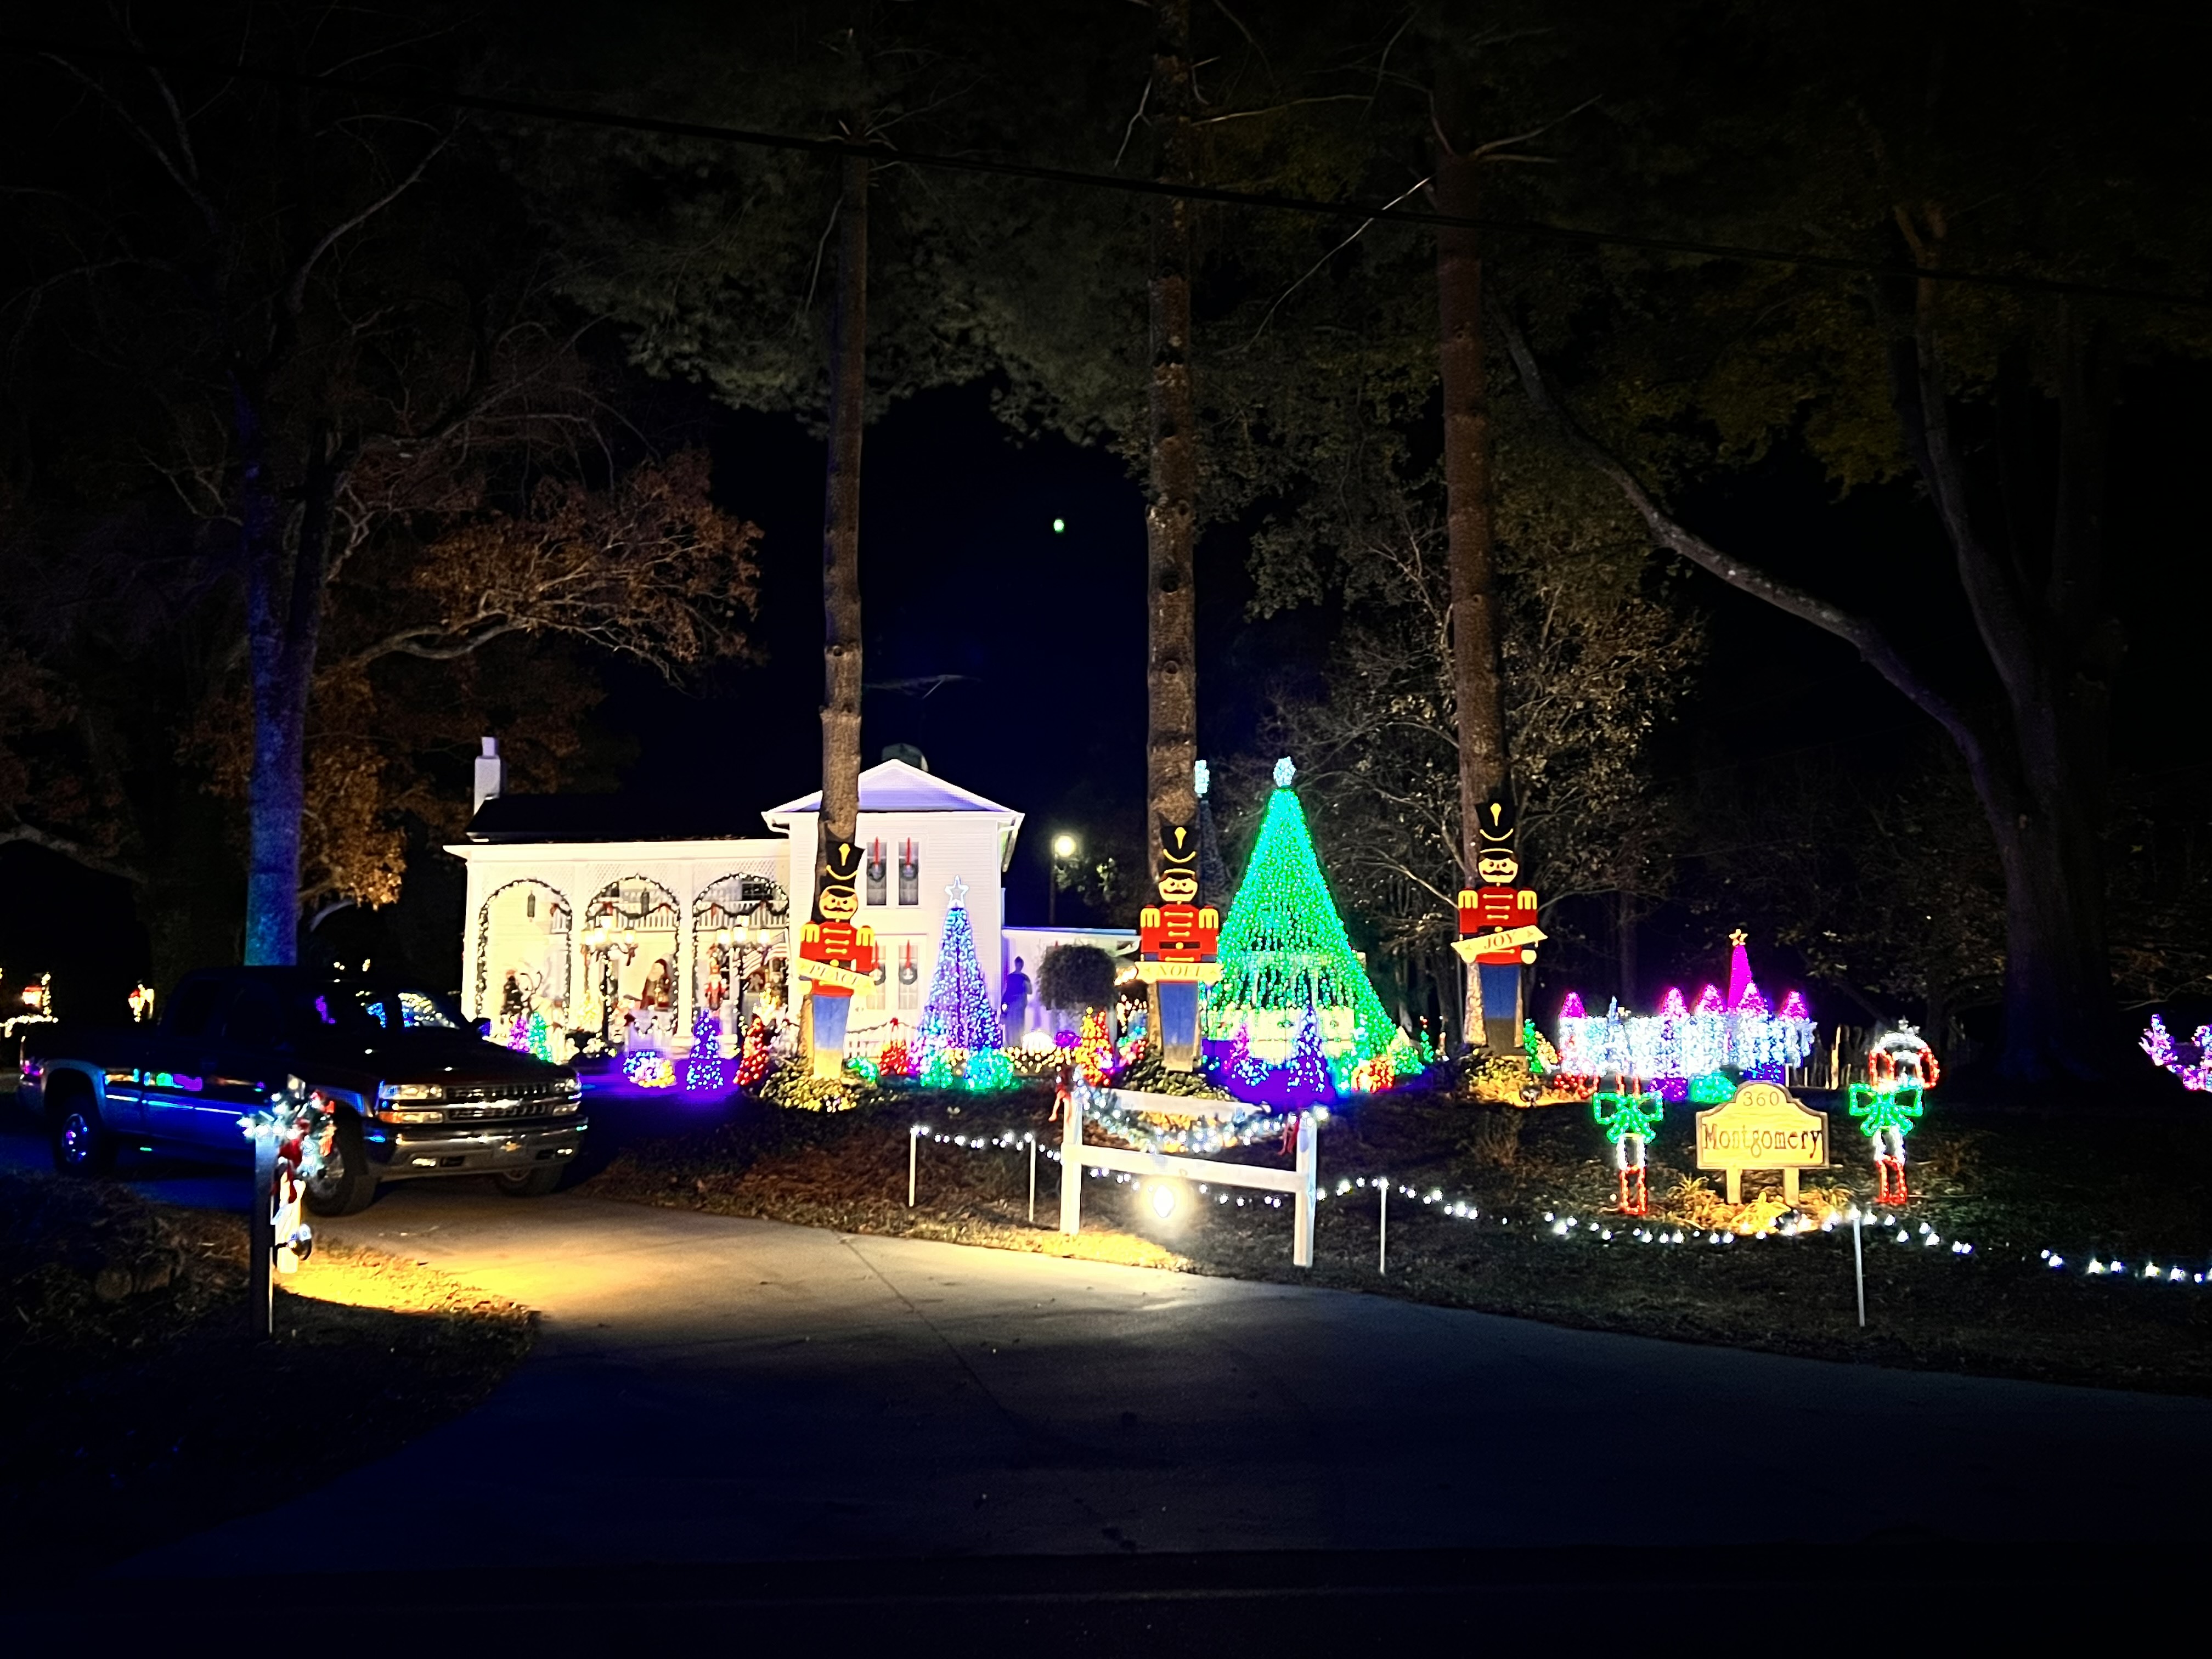 The Christmas House in Inman.